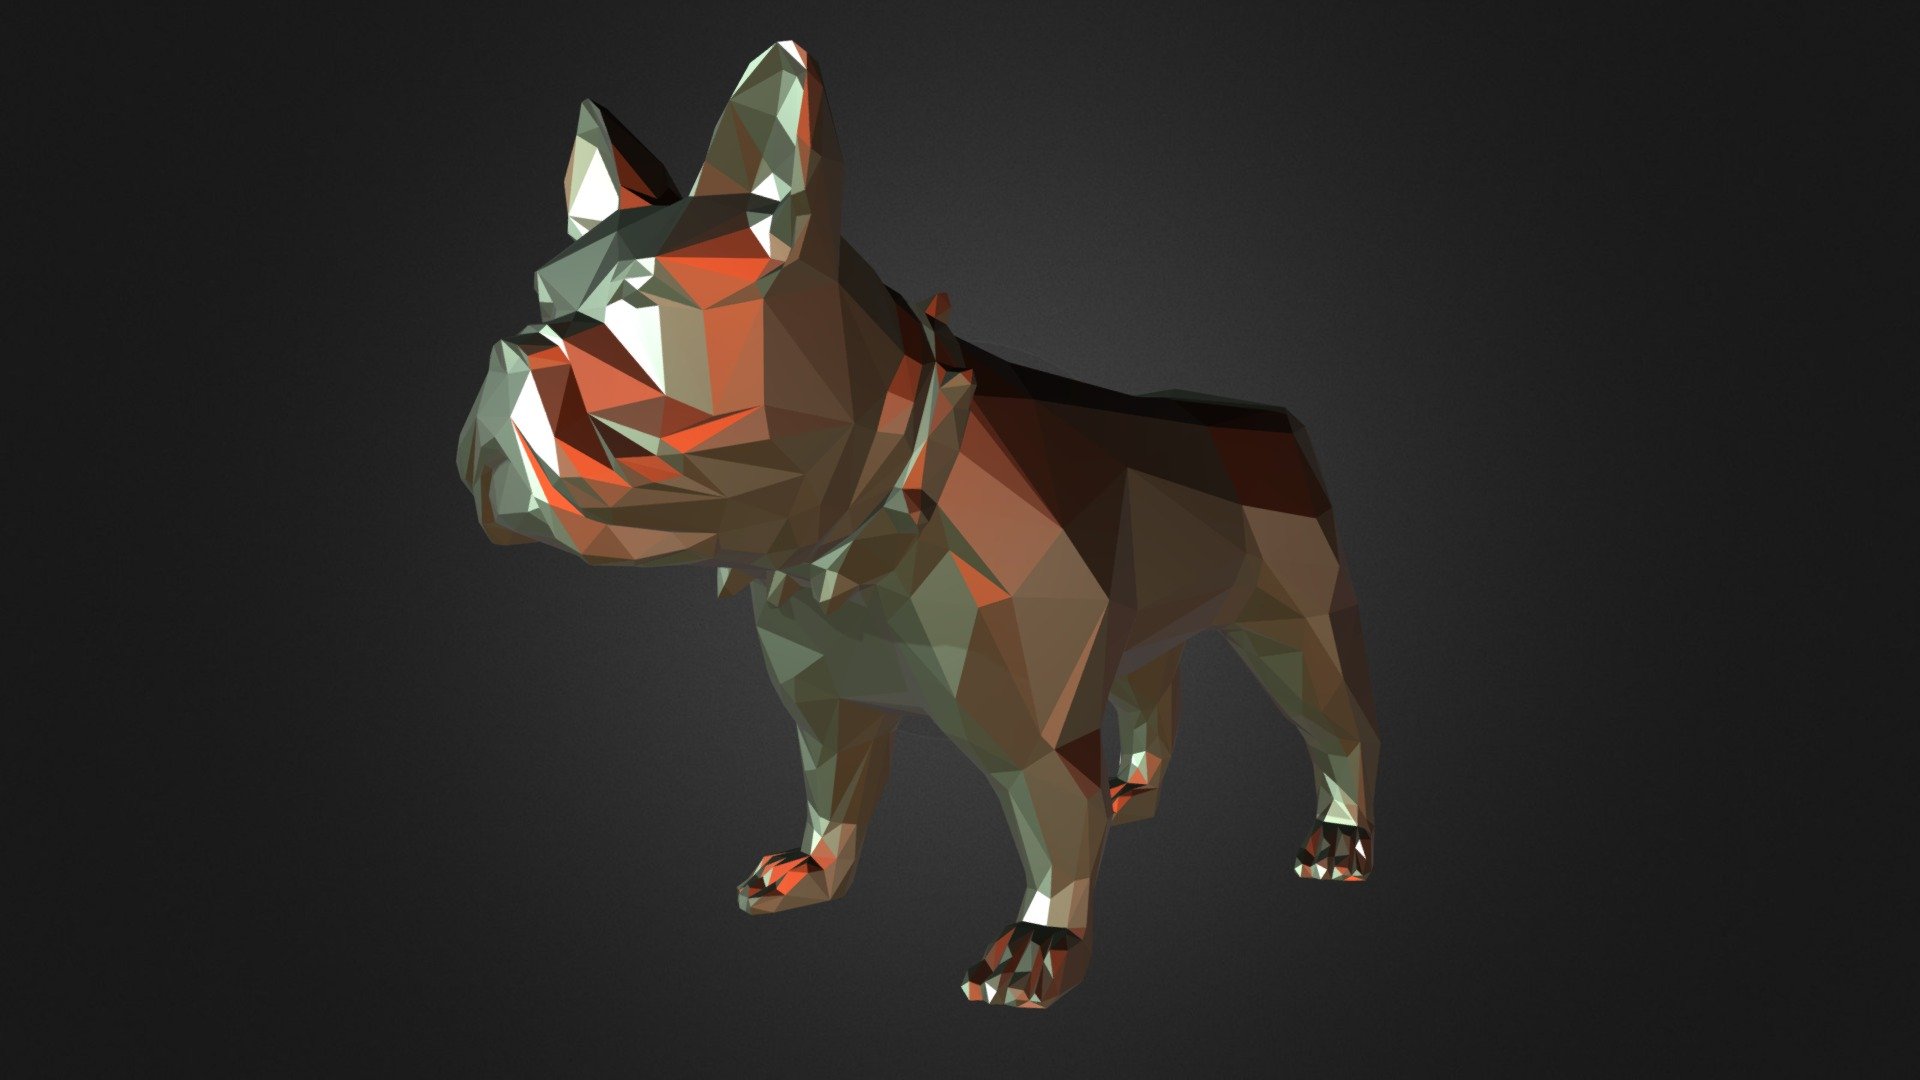 BULL DOG LOWPOLY

Modeled in 3D Max 2013. Used as a Molding, 3D Print, Plaster cast or Copper and 3D Stoneworking or 3D Woodworking &amp; Art Design, Interior design, decoration art…Hope you like it!

INCLUDE FILE

File Formats: - 3D Max 2016 - Cinema 4D R19 - FBX (Multi Format) - OBJ (Multi Format) - 3DS (Multi Format) - STL (Multi Format) - MTL (Multi Format)

Thank you! - BULL DOG LOWPOLY - Buy Royalty Free 3D model by DTA DESIGN STUDIO (@dtadesignstudio) 3d model